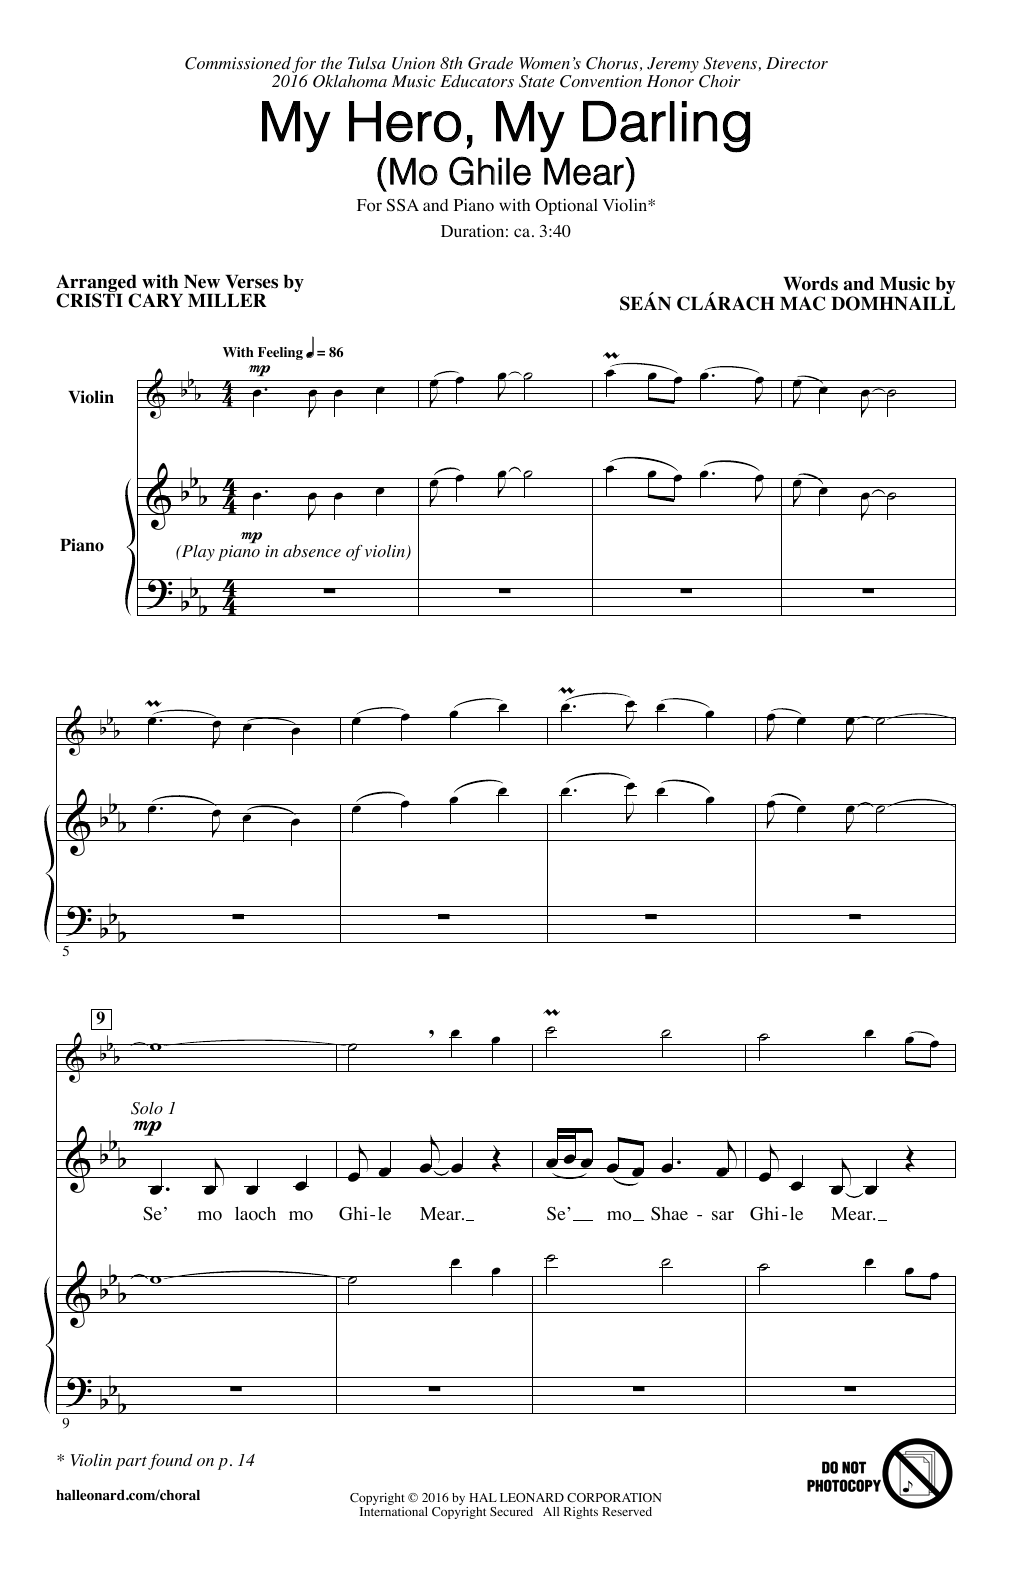 Download Cristi Cary Miller My Hero, My Darling (Mo Ghile Mear) Sheet Music